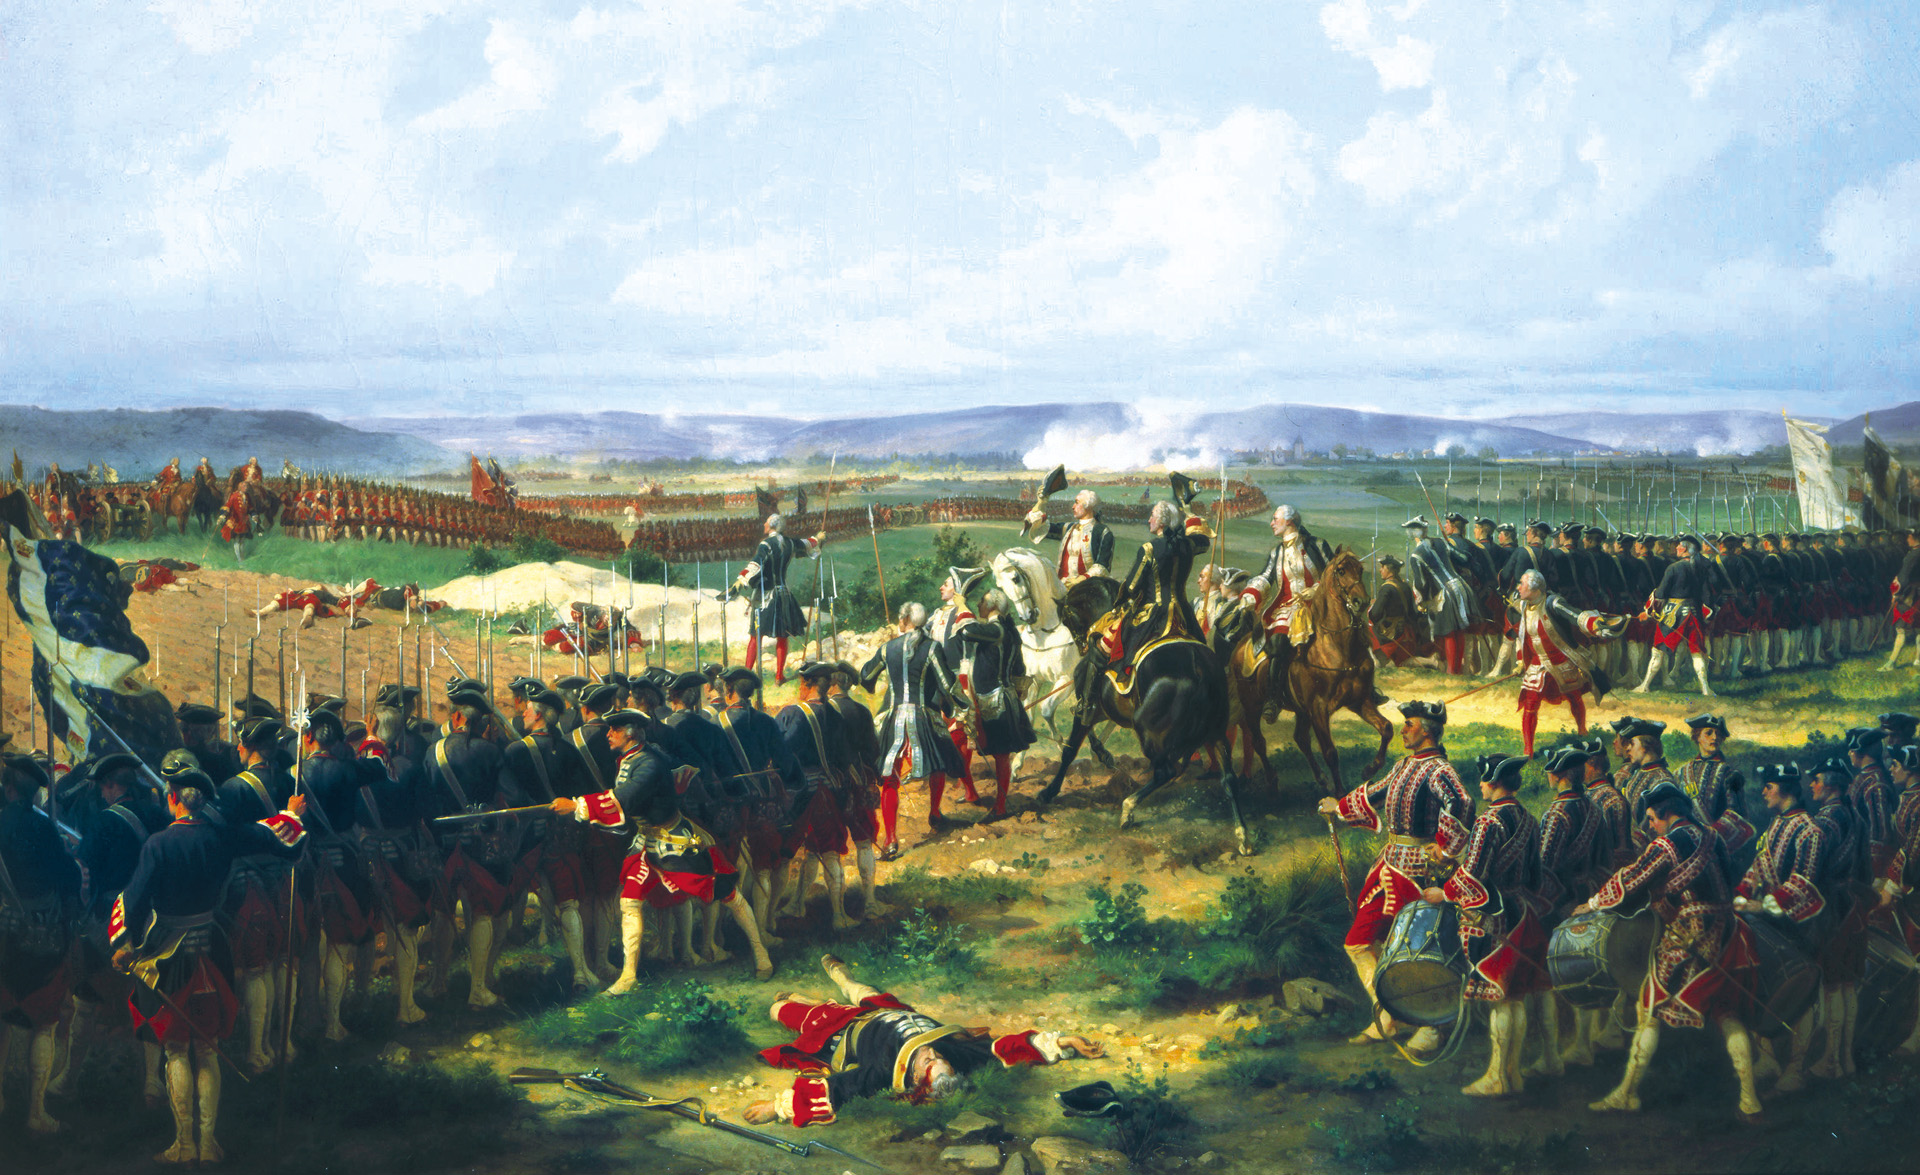 British Lord Charles Hay in the middle ground of the painting is said to have offered French Comte Joseph Charles Alexandre d’Anterroches the first volley, an offer that the Comte politely declined. Hay’s was confident his troops would respond with an even more devastating one.  